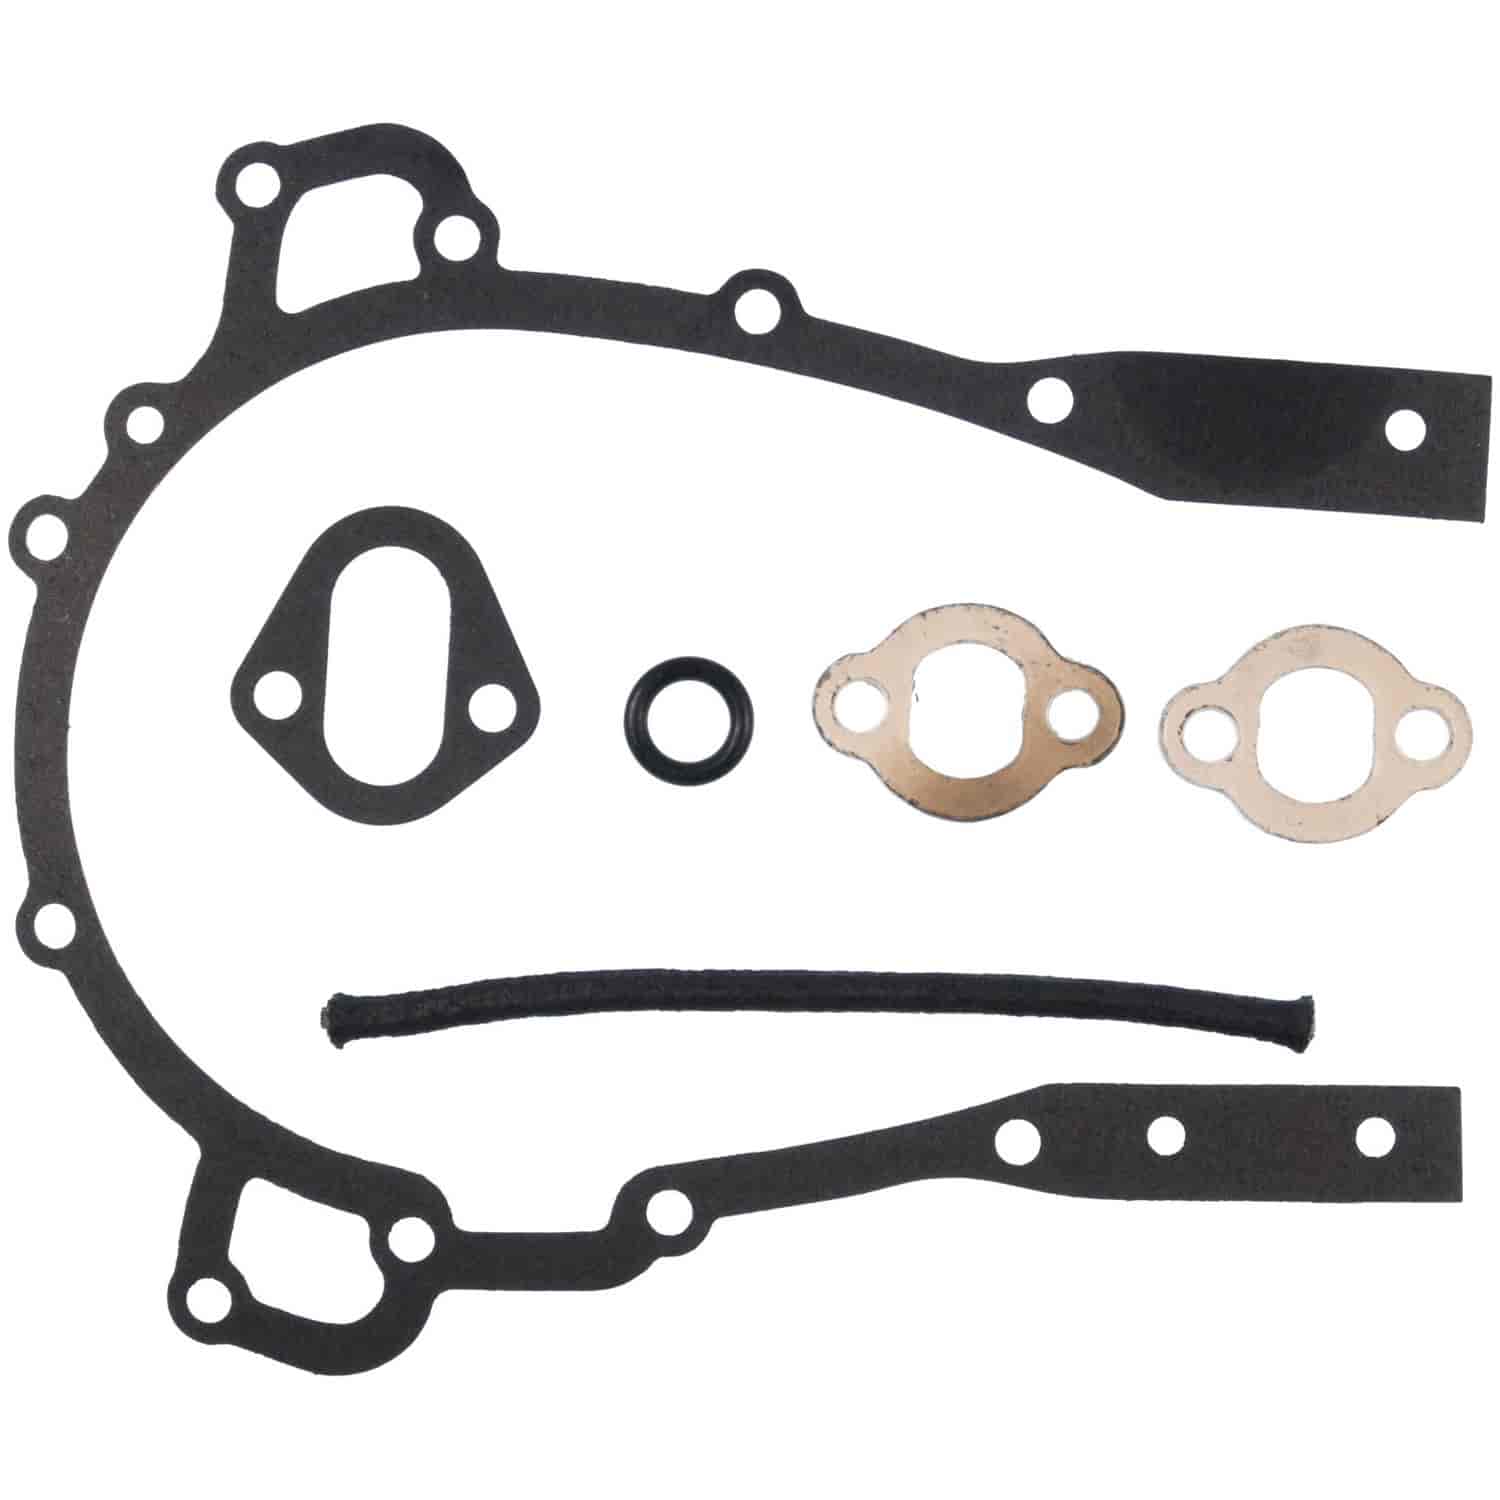 Clevite MAHLE Timing Cover Set Bui 400 401 425 64-66